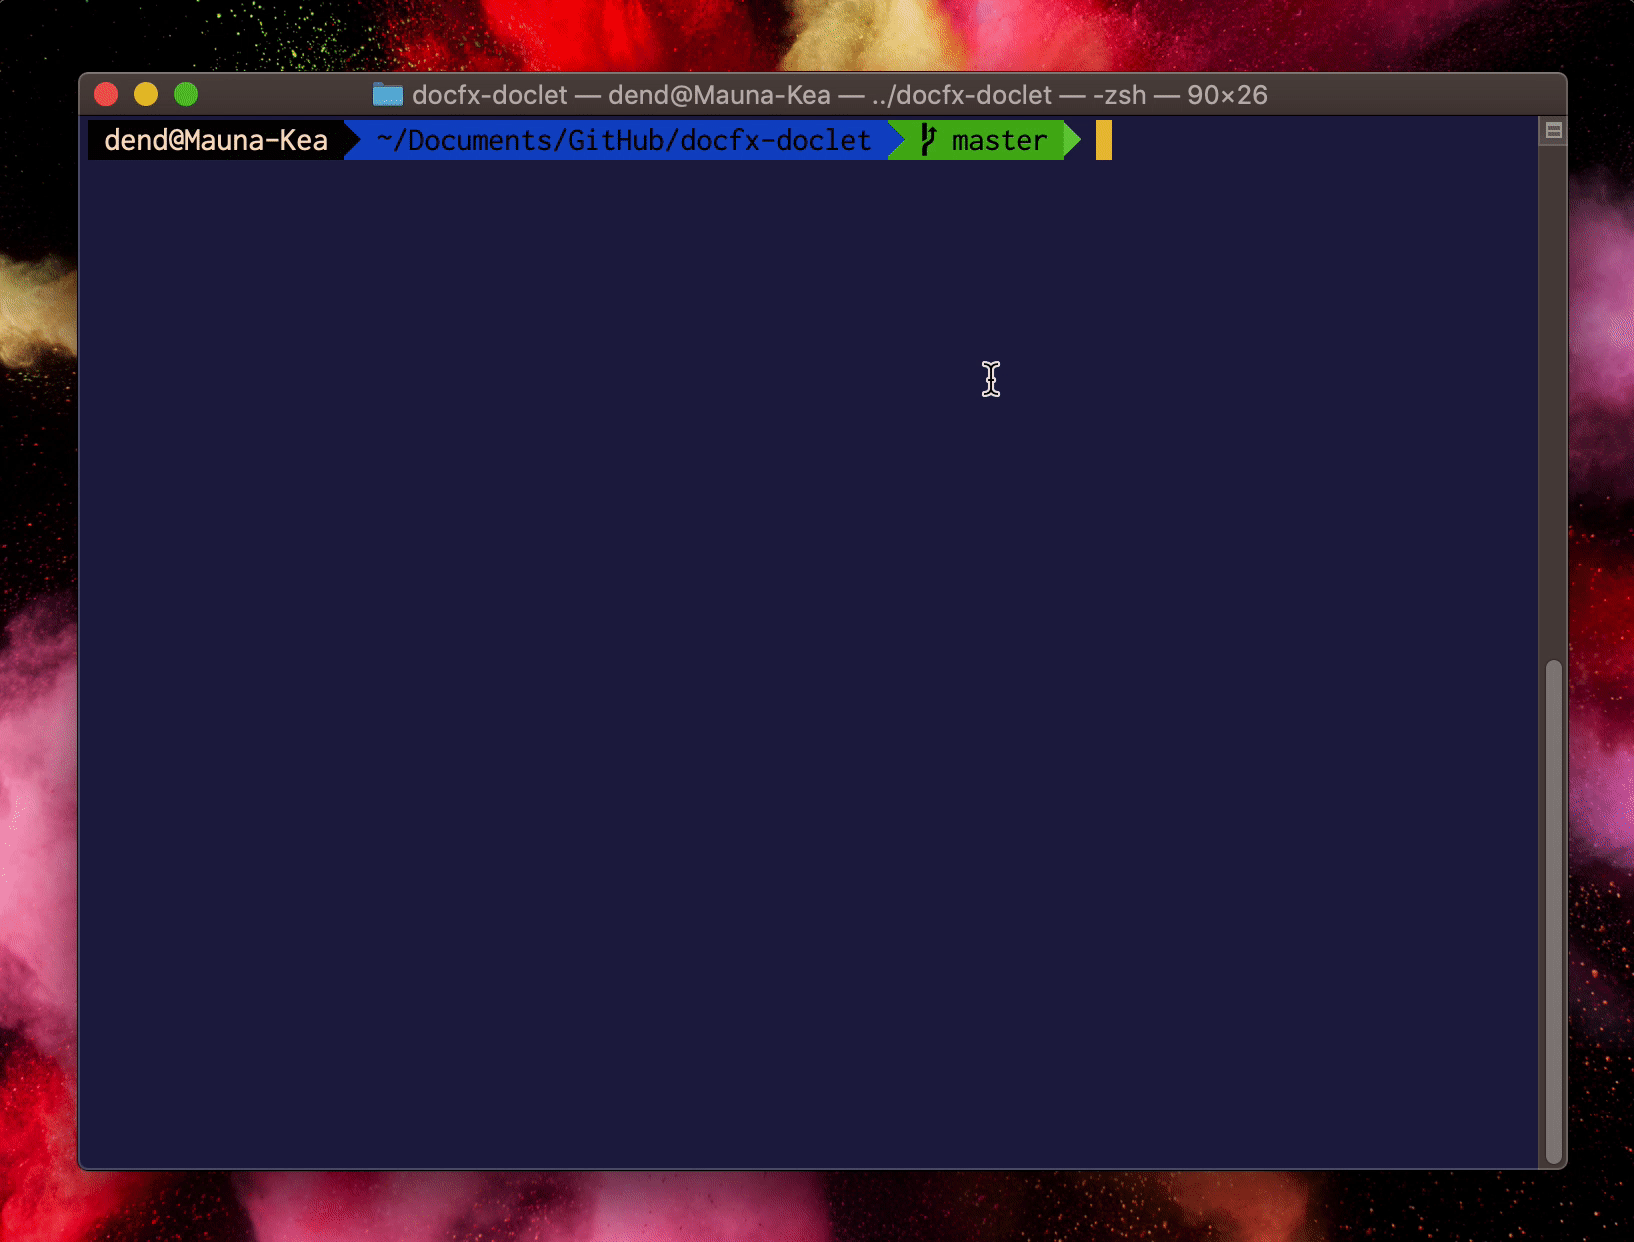 Running mvn compile in the terminal